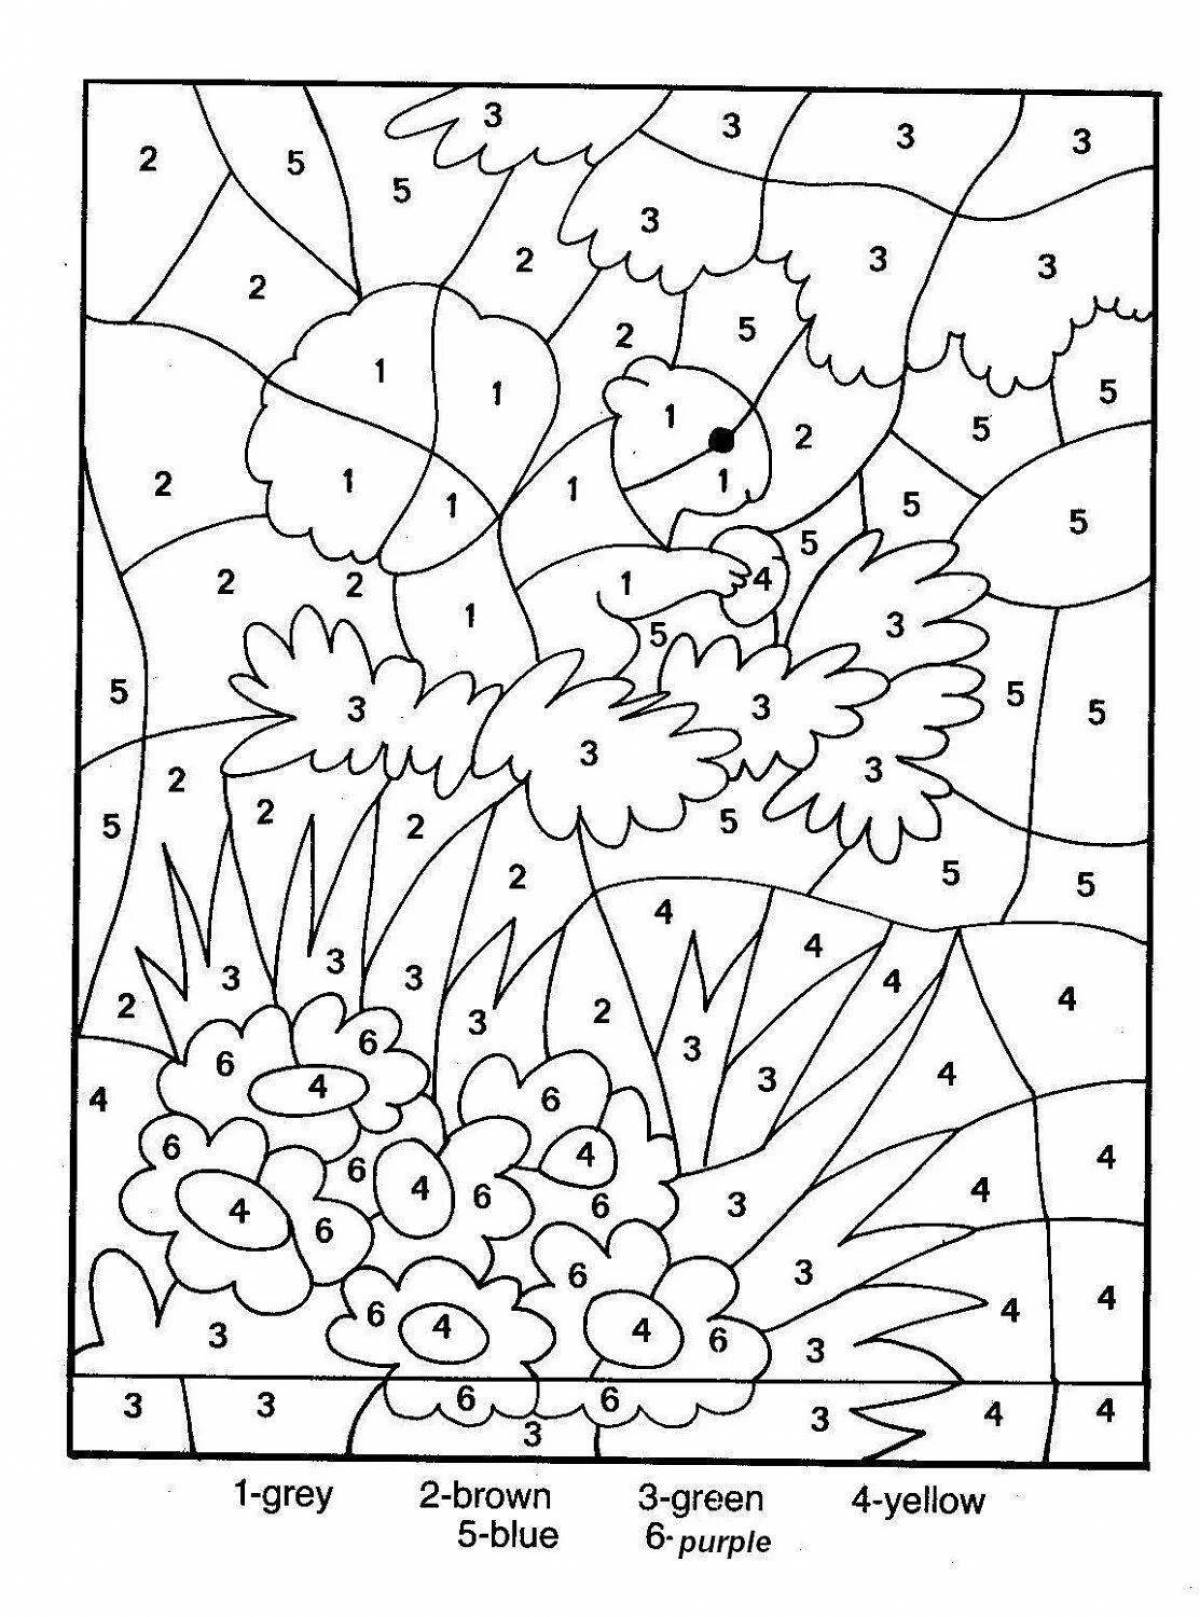 Invigorating coloring book color by number